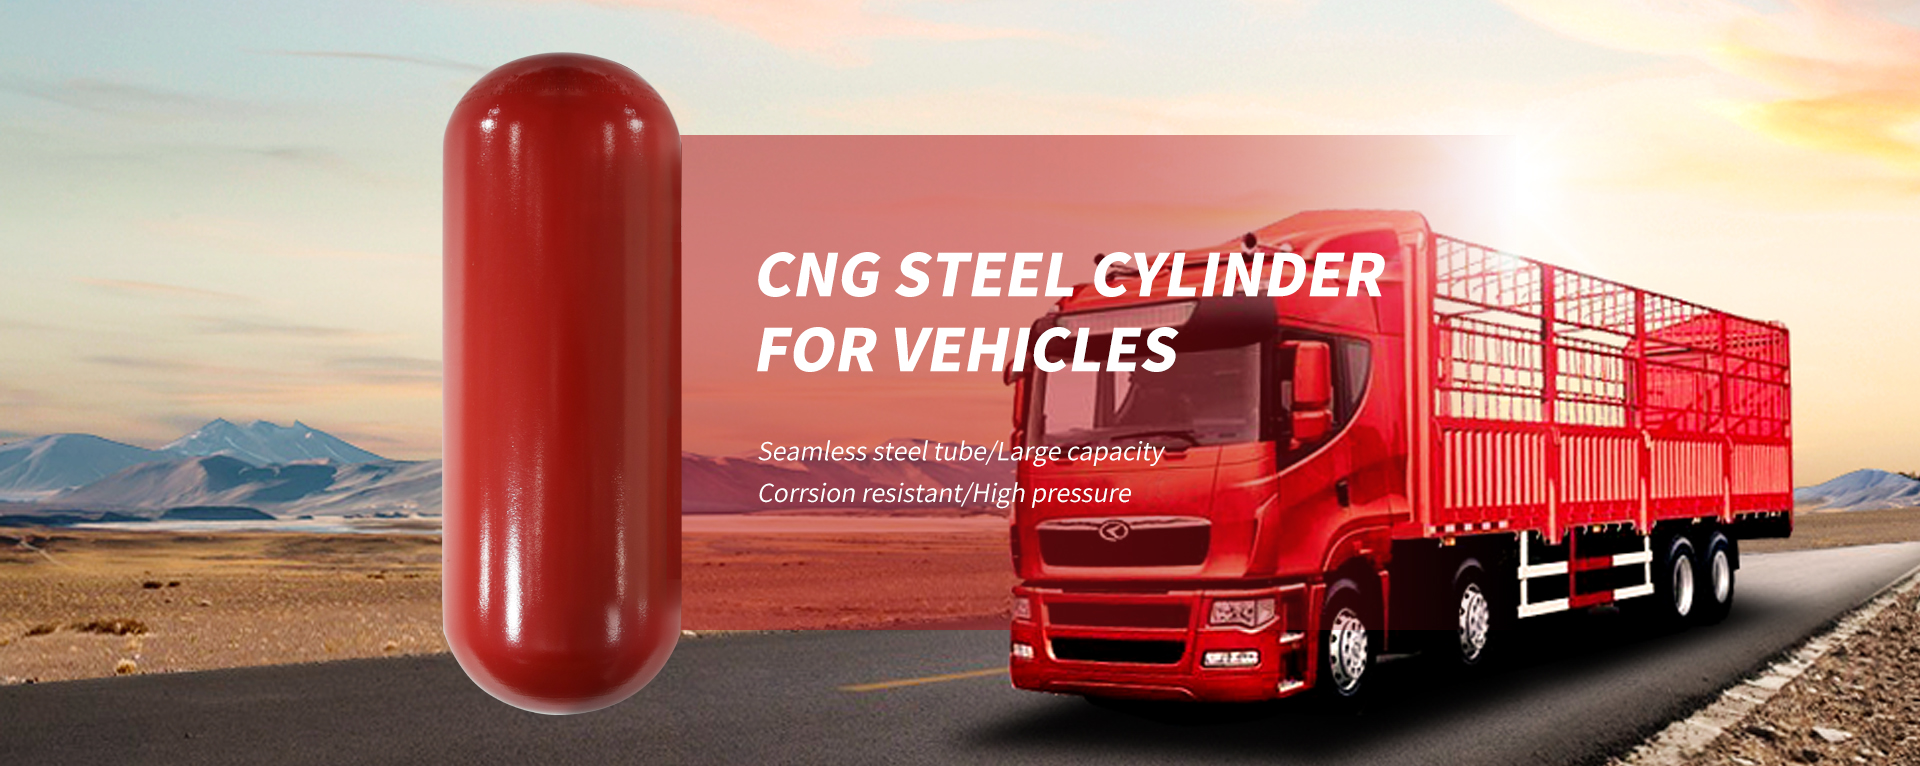 CNG Steel Cylinder for Vehicles